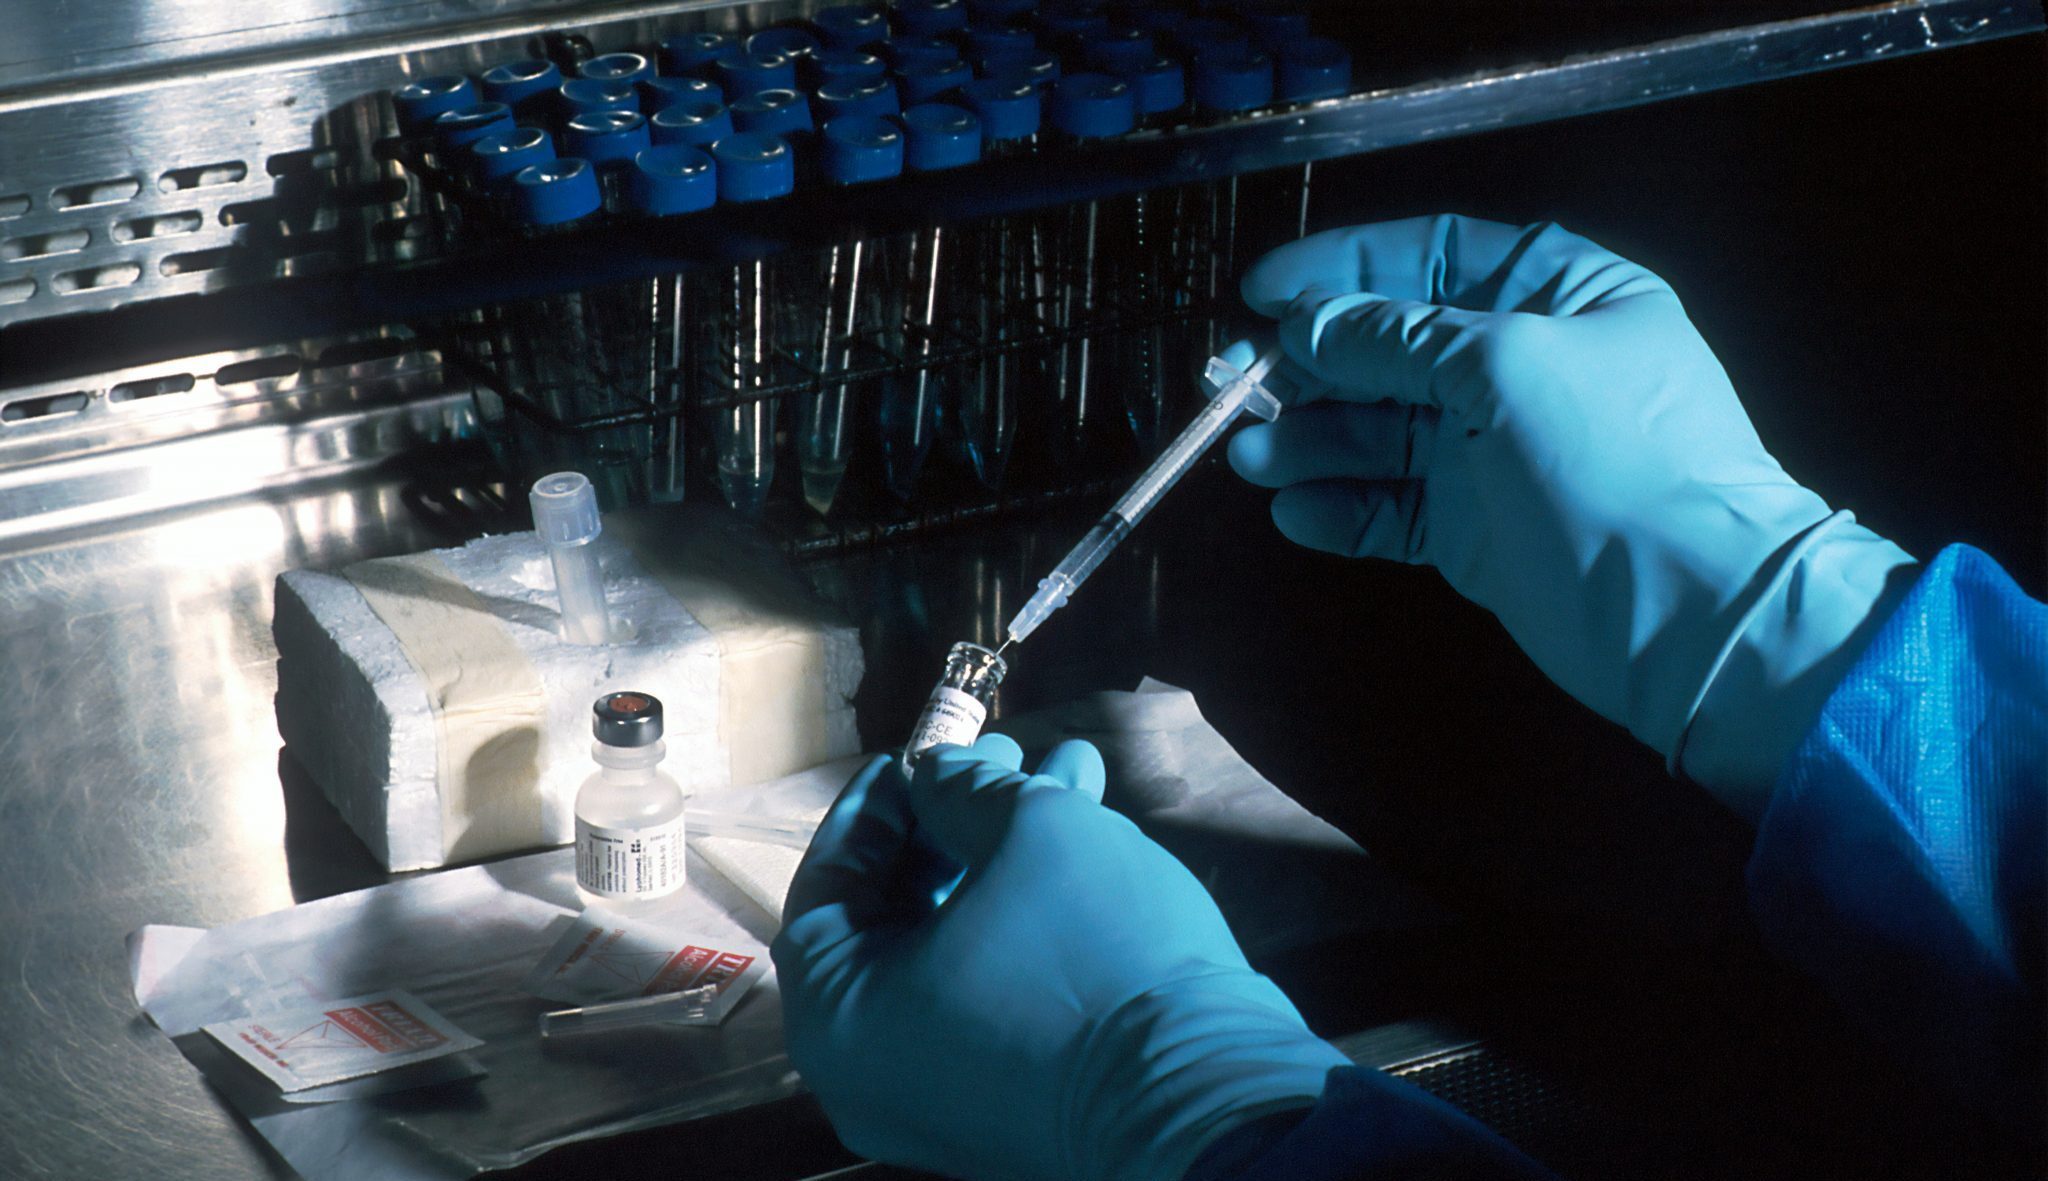 A pair of hands in blue sterile gloves inserting a syringe into a vial.